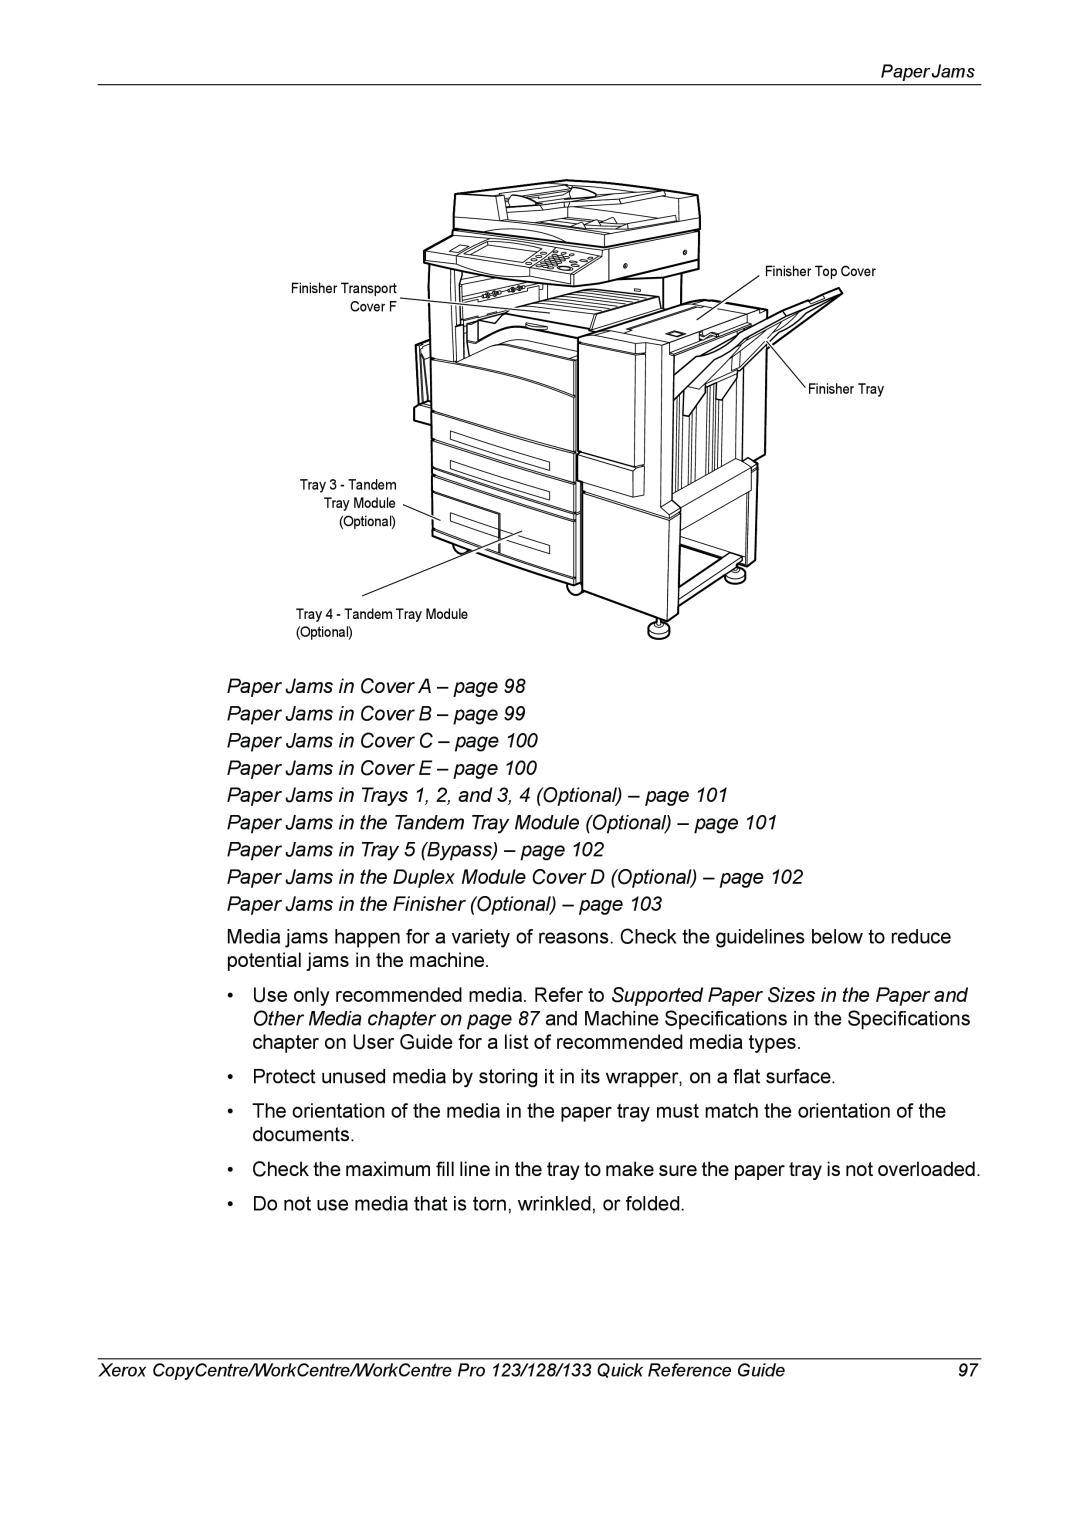 Xerox 604P18037 manual Protect unused media by storing it in its wrapper, on a flat surface 